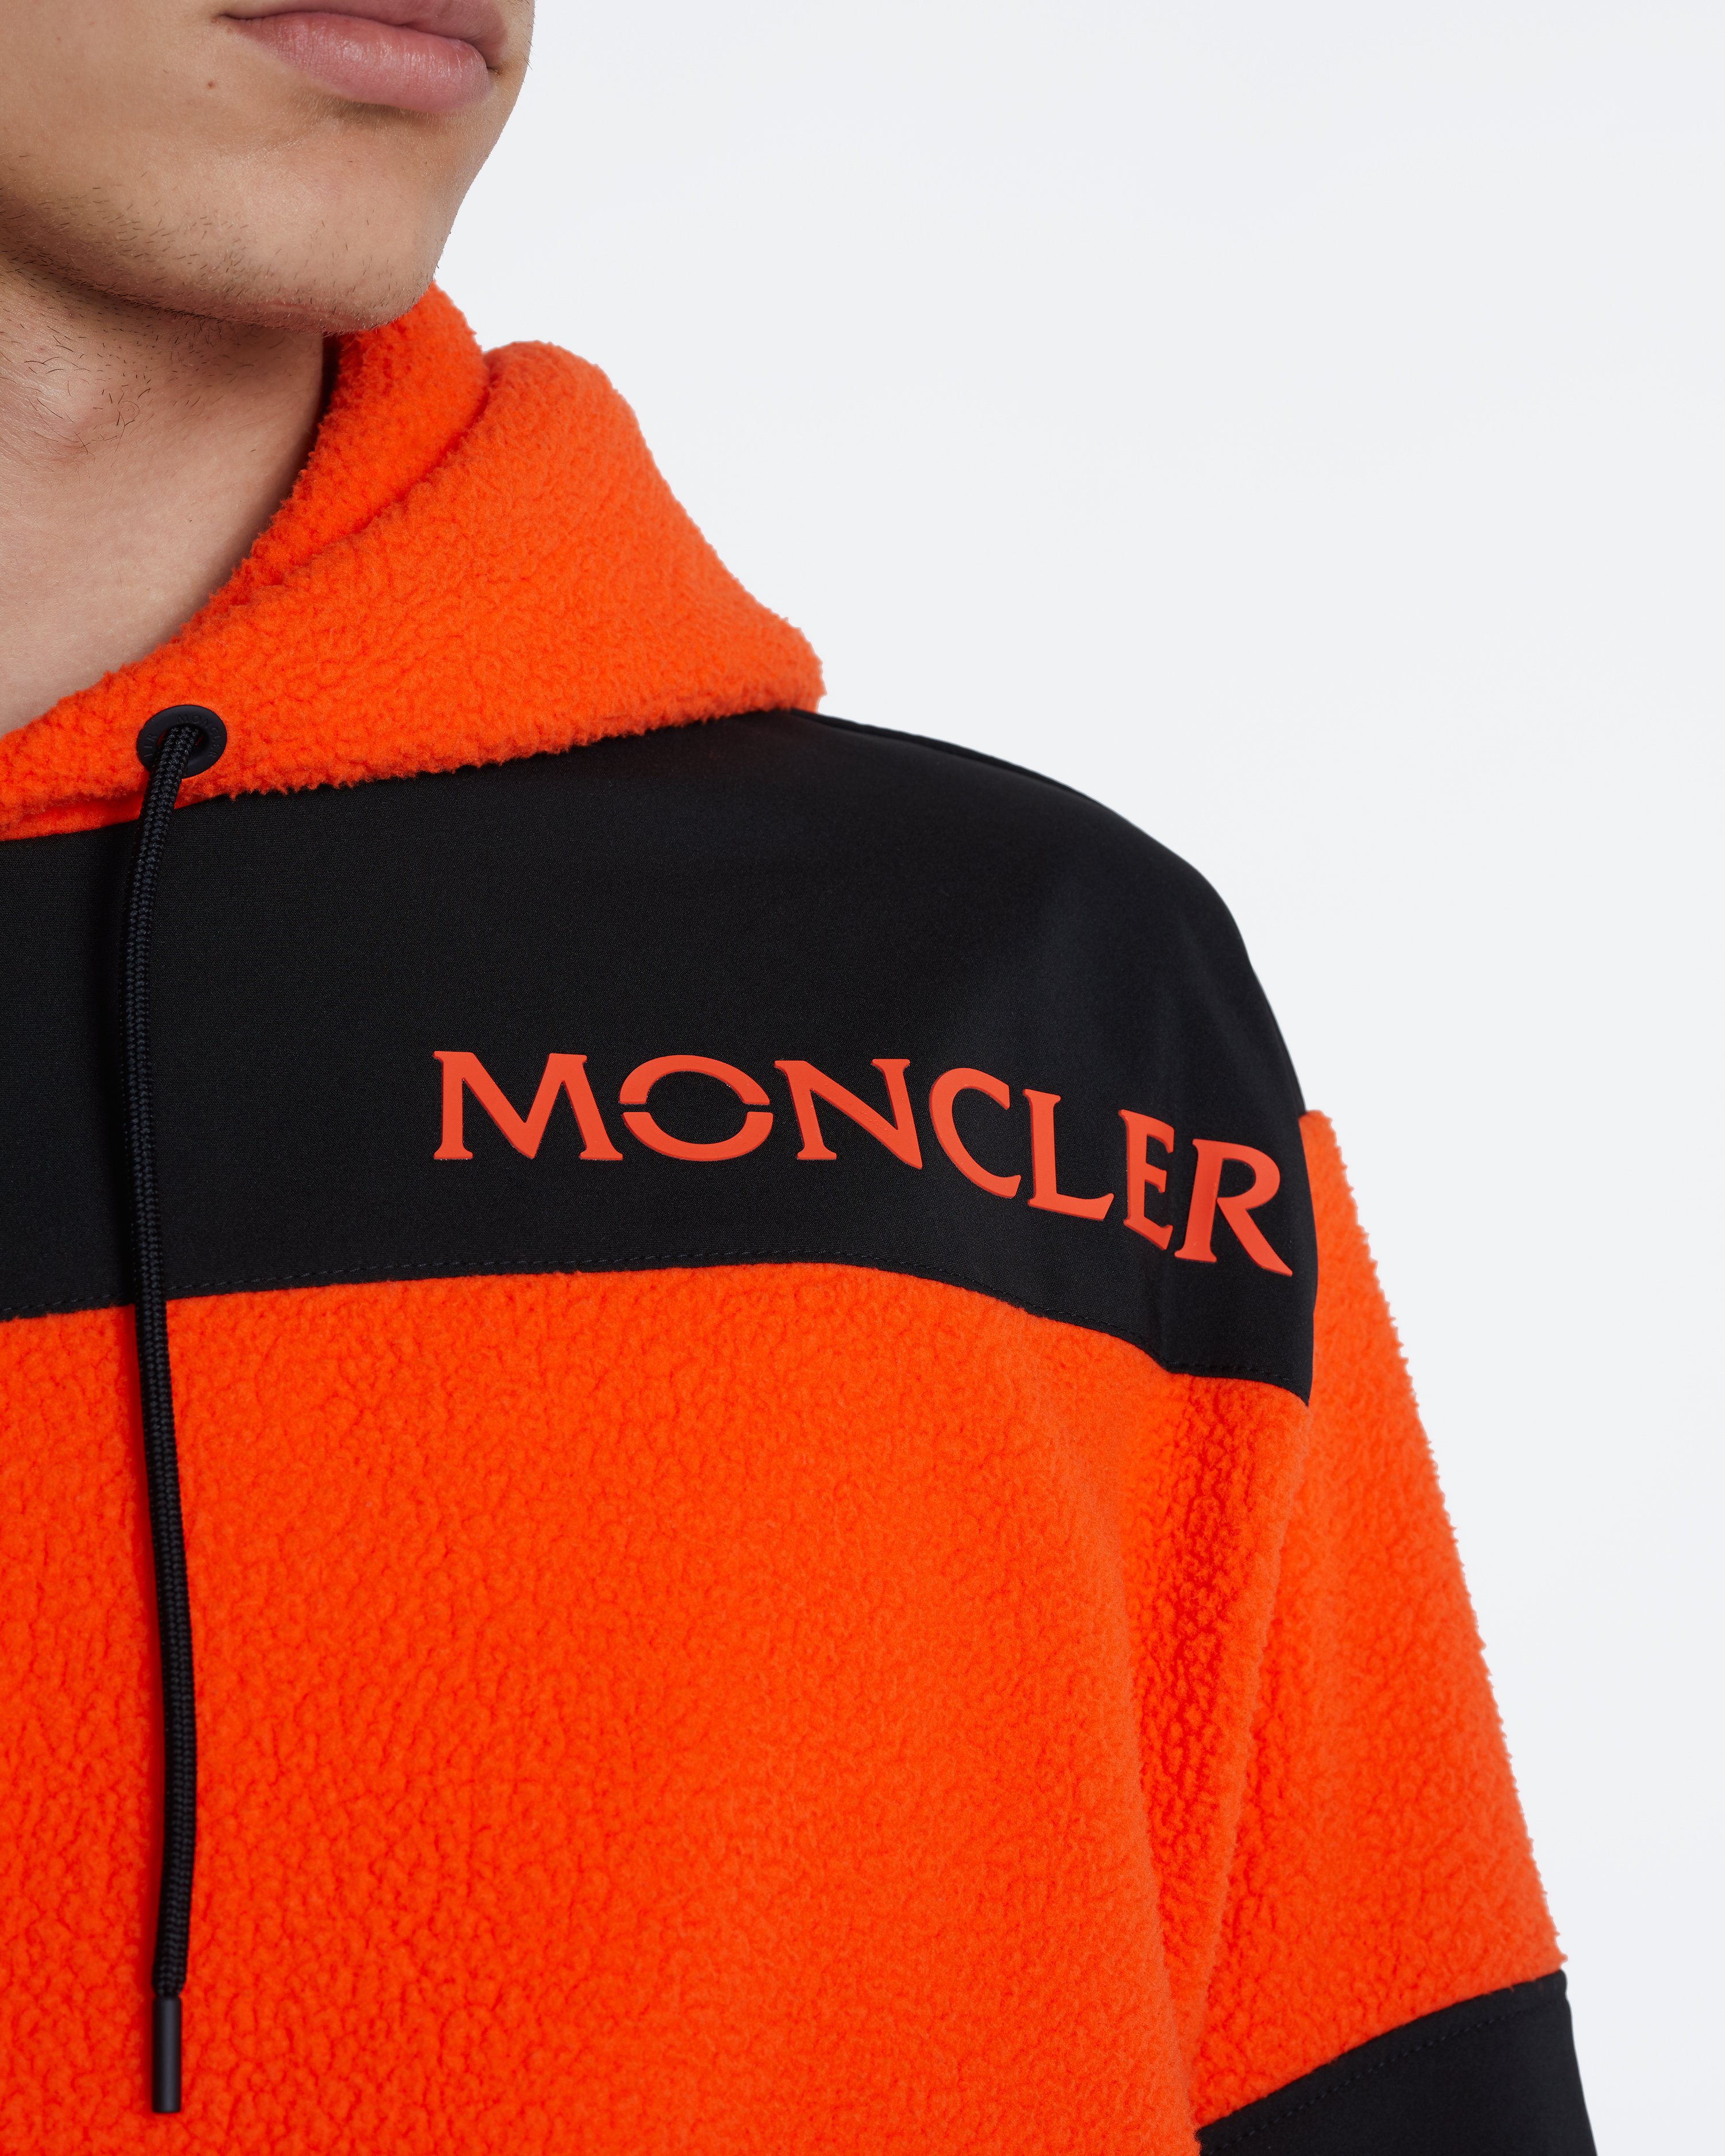 Moncler Genius – Recycled Jumper | Highsnobiety Shop